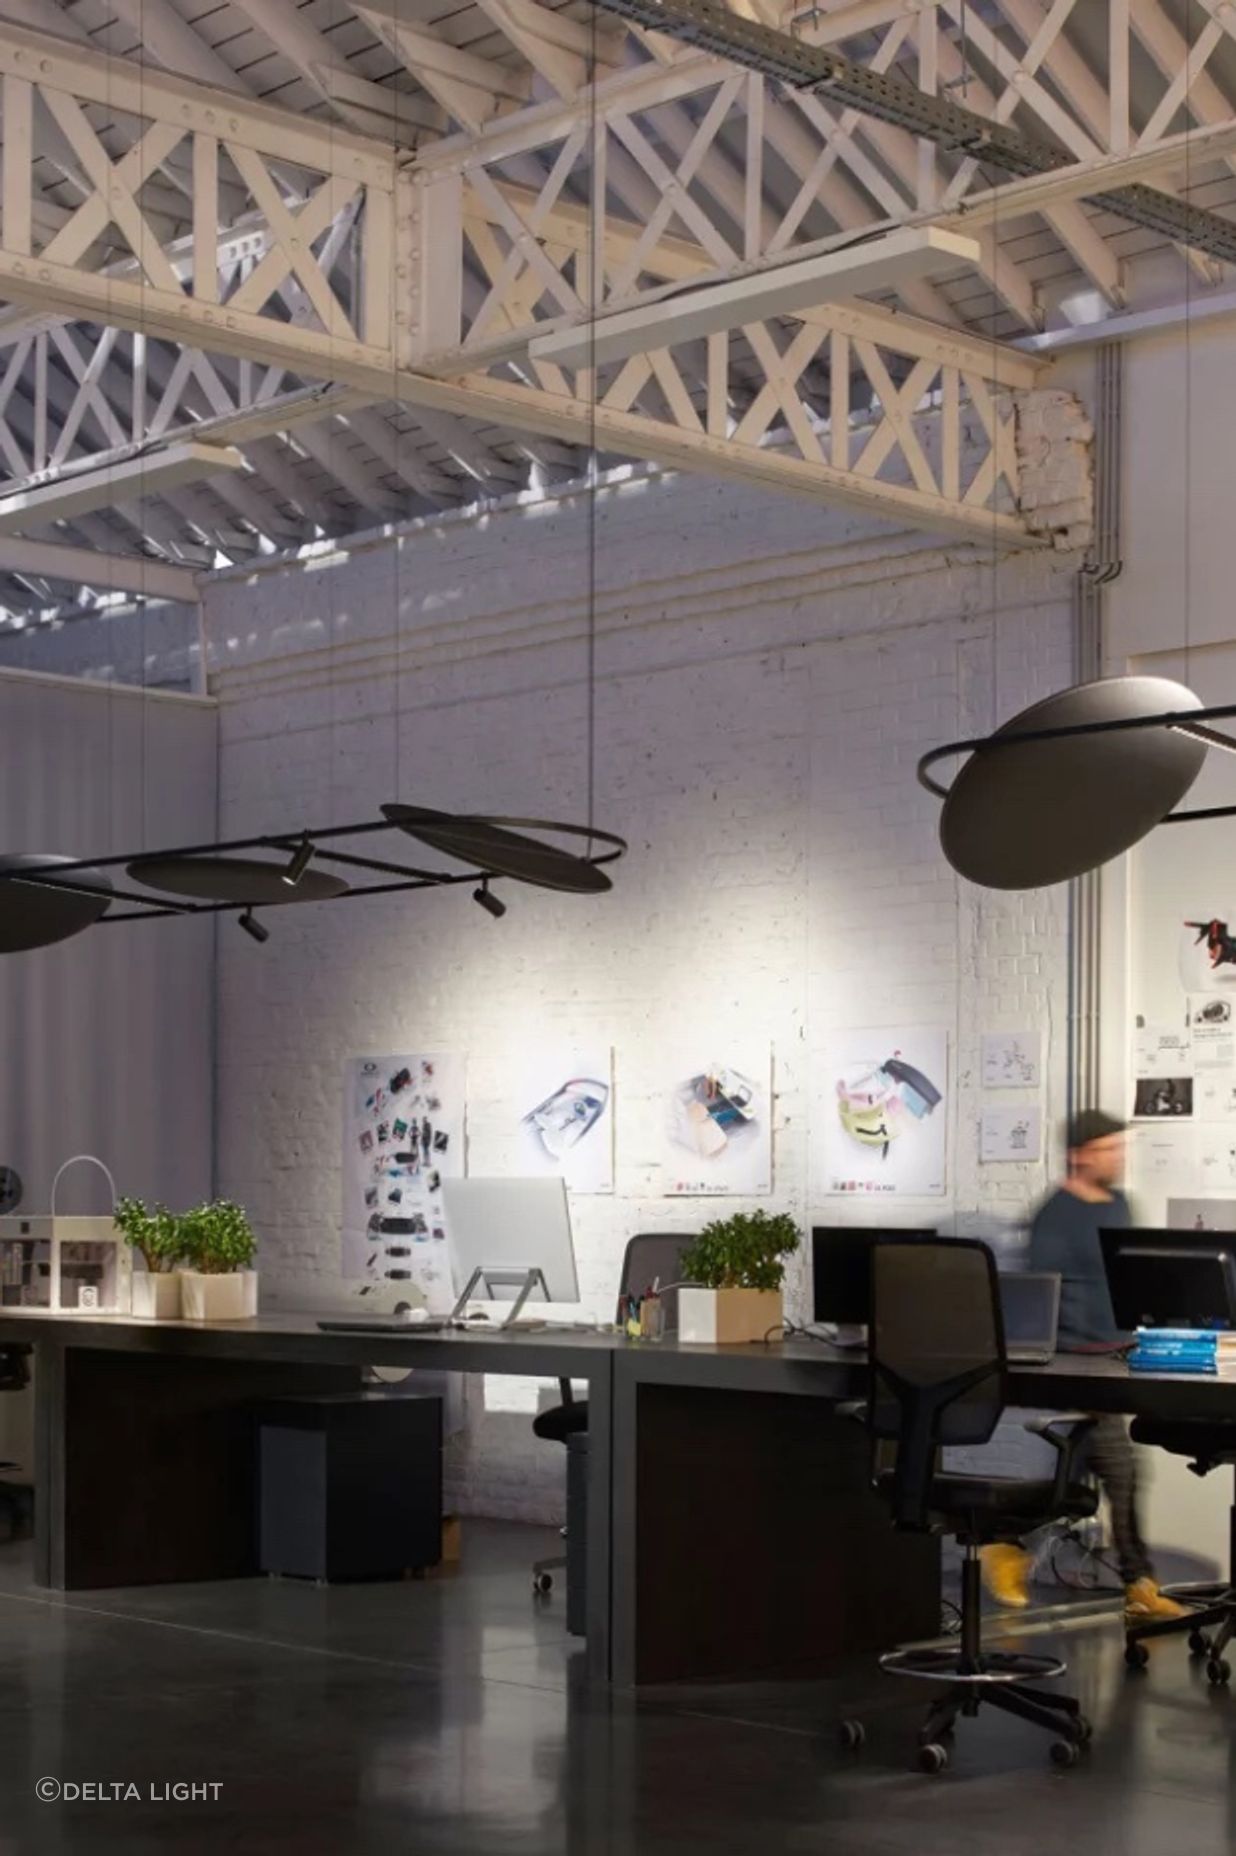 The linear design is deftly suspended above work desks to improve sound absorption.